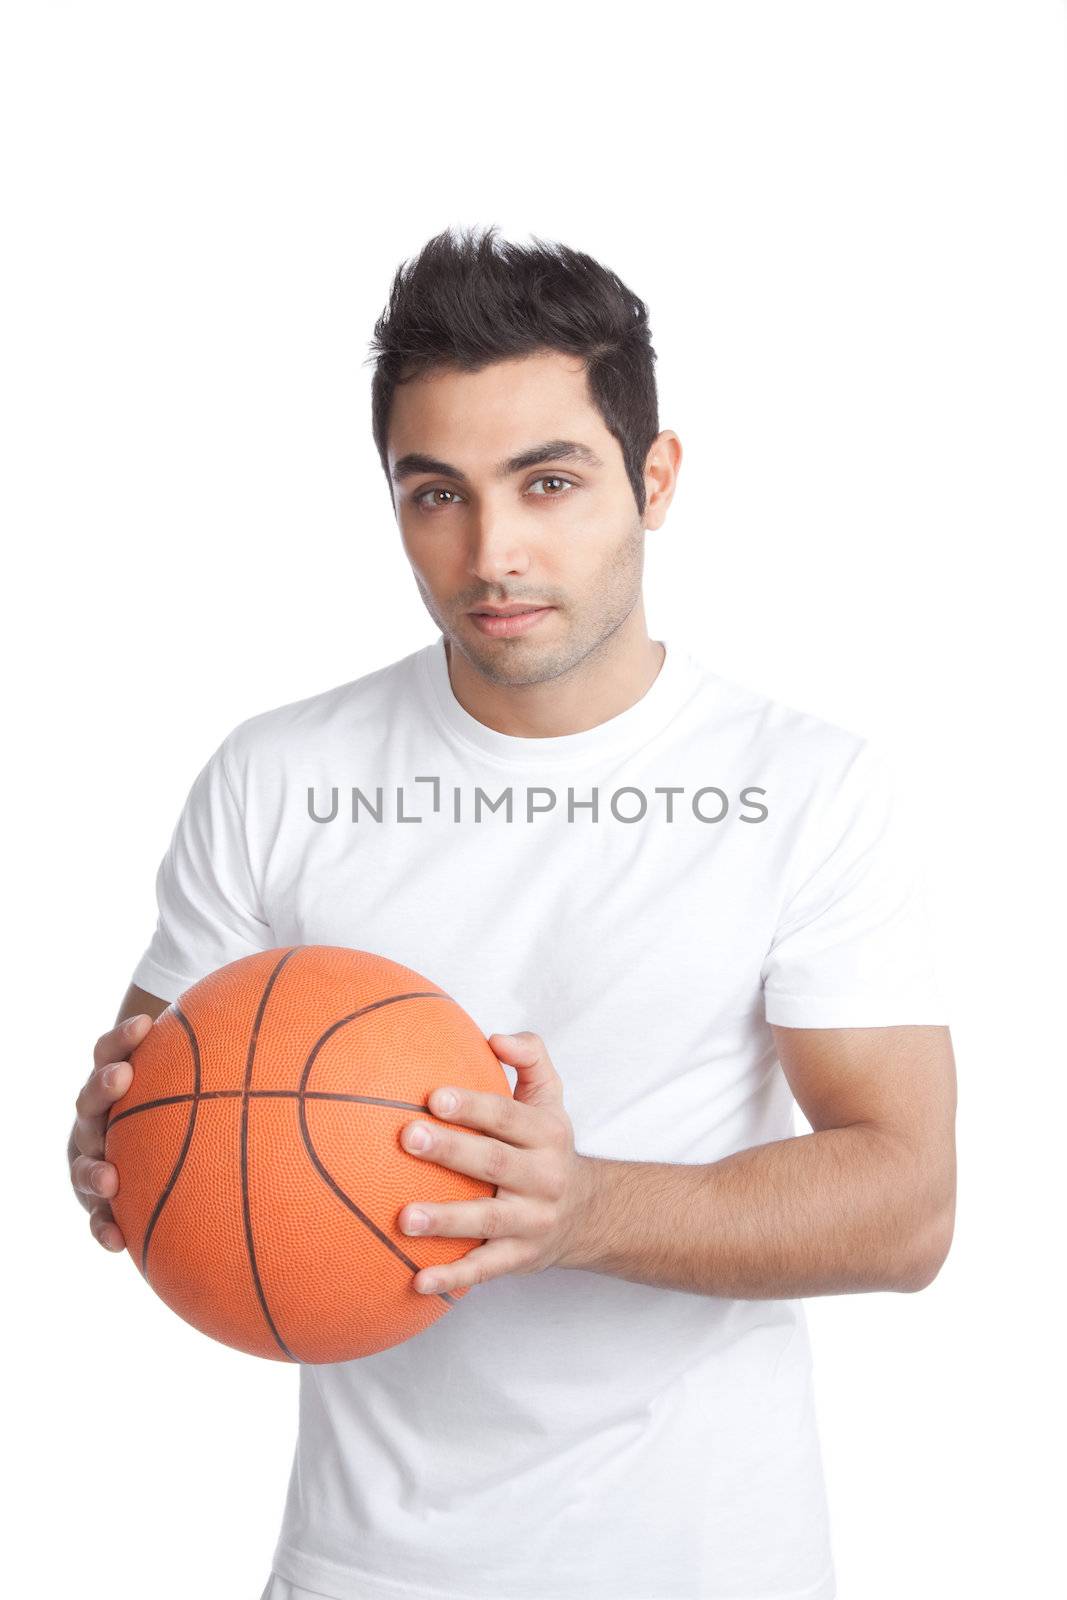 Portrait of young man holding basketball isolated on white background.